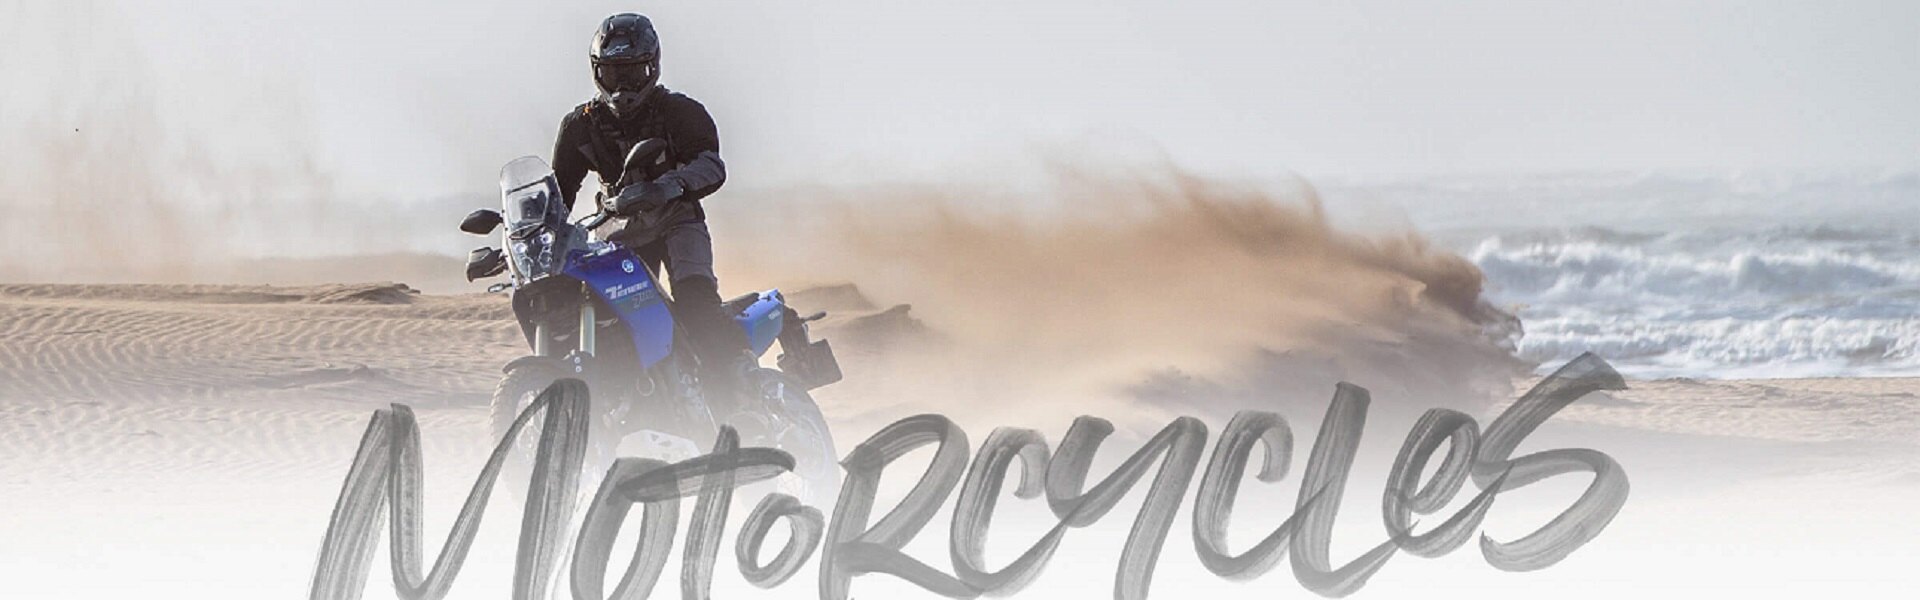  Banner Motorcycles 2